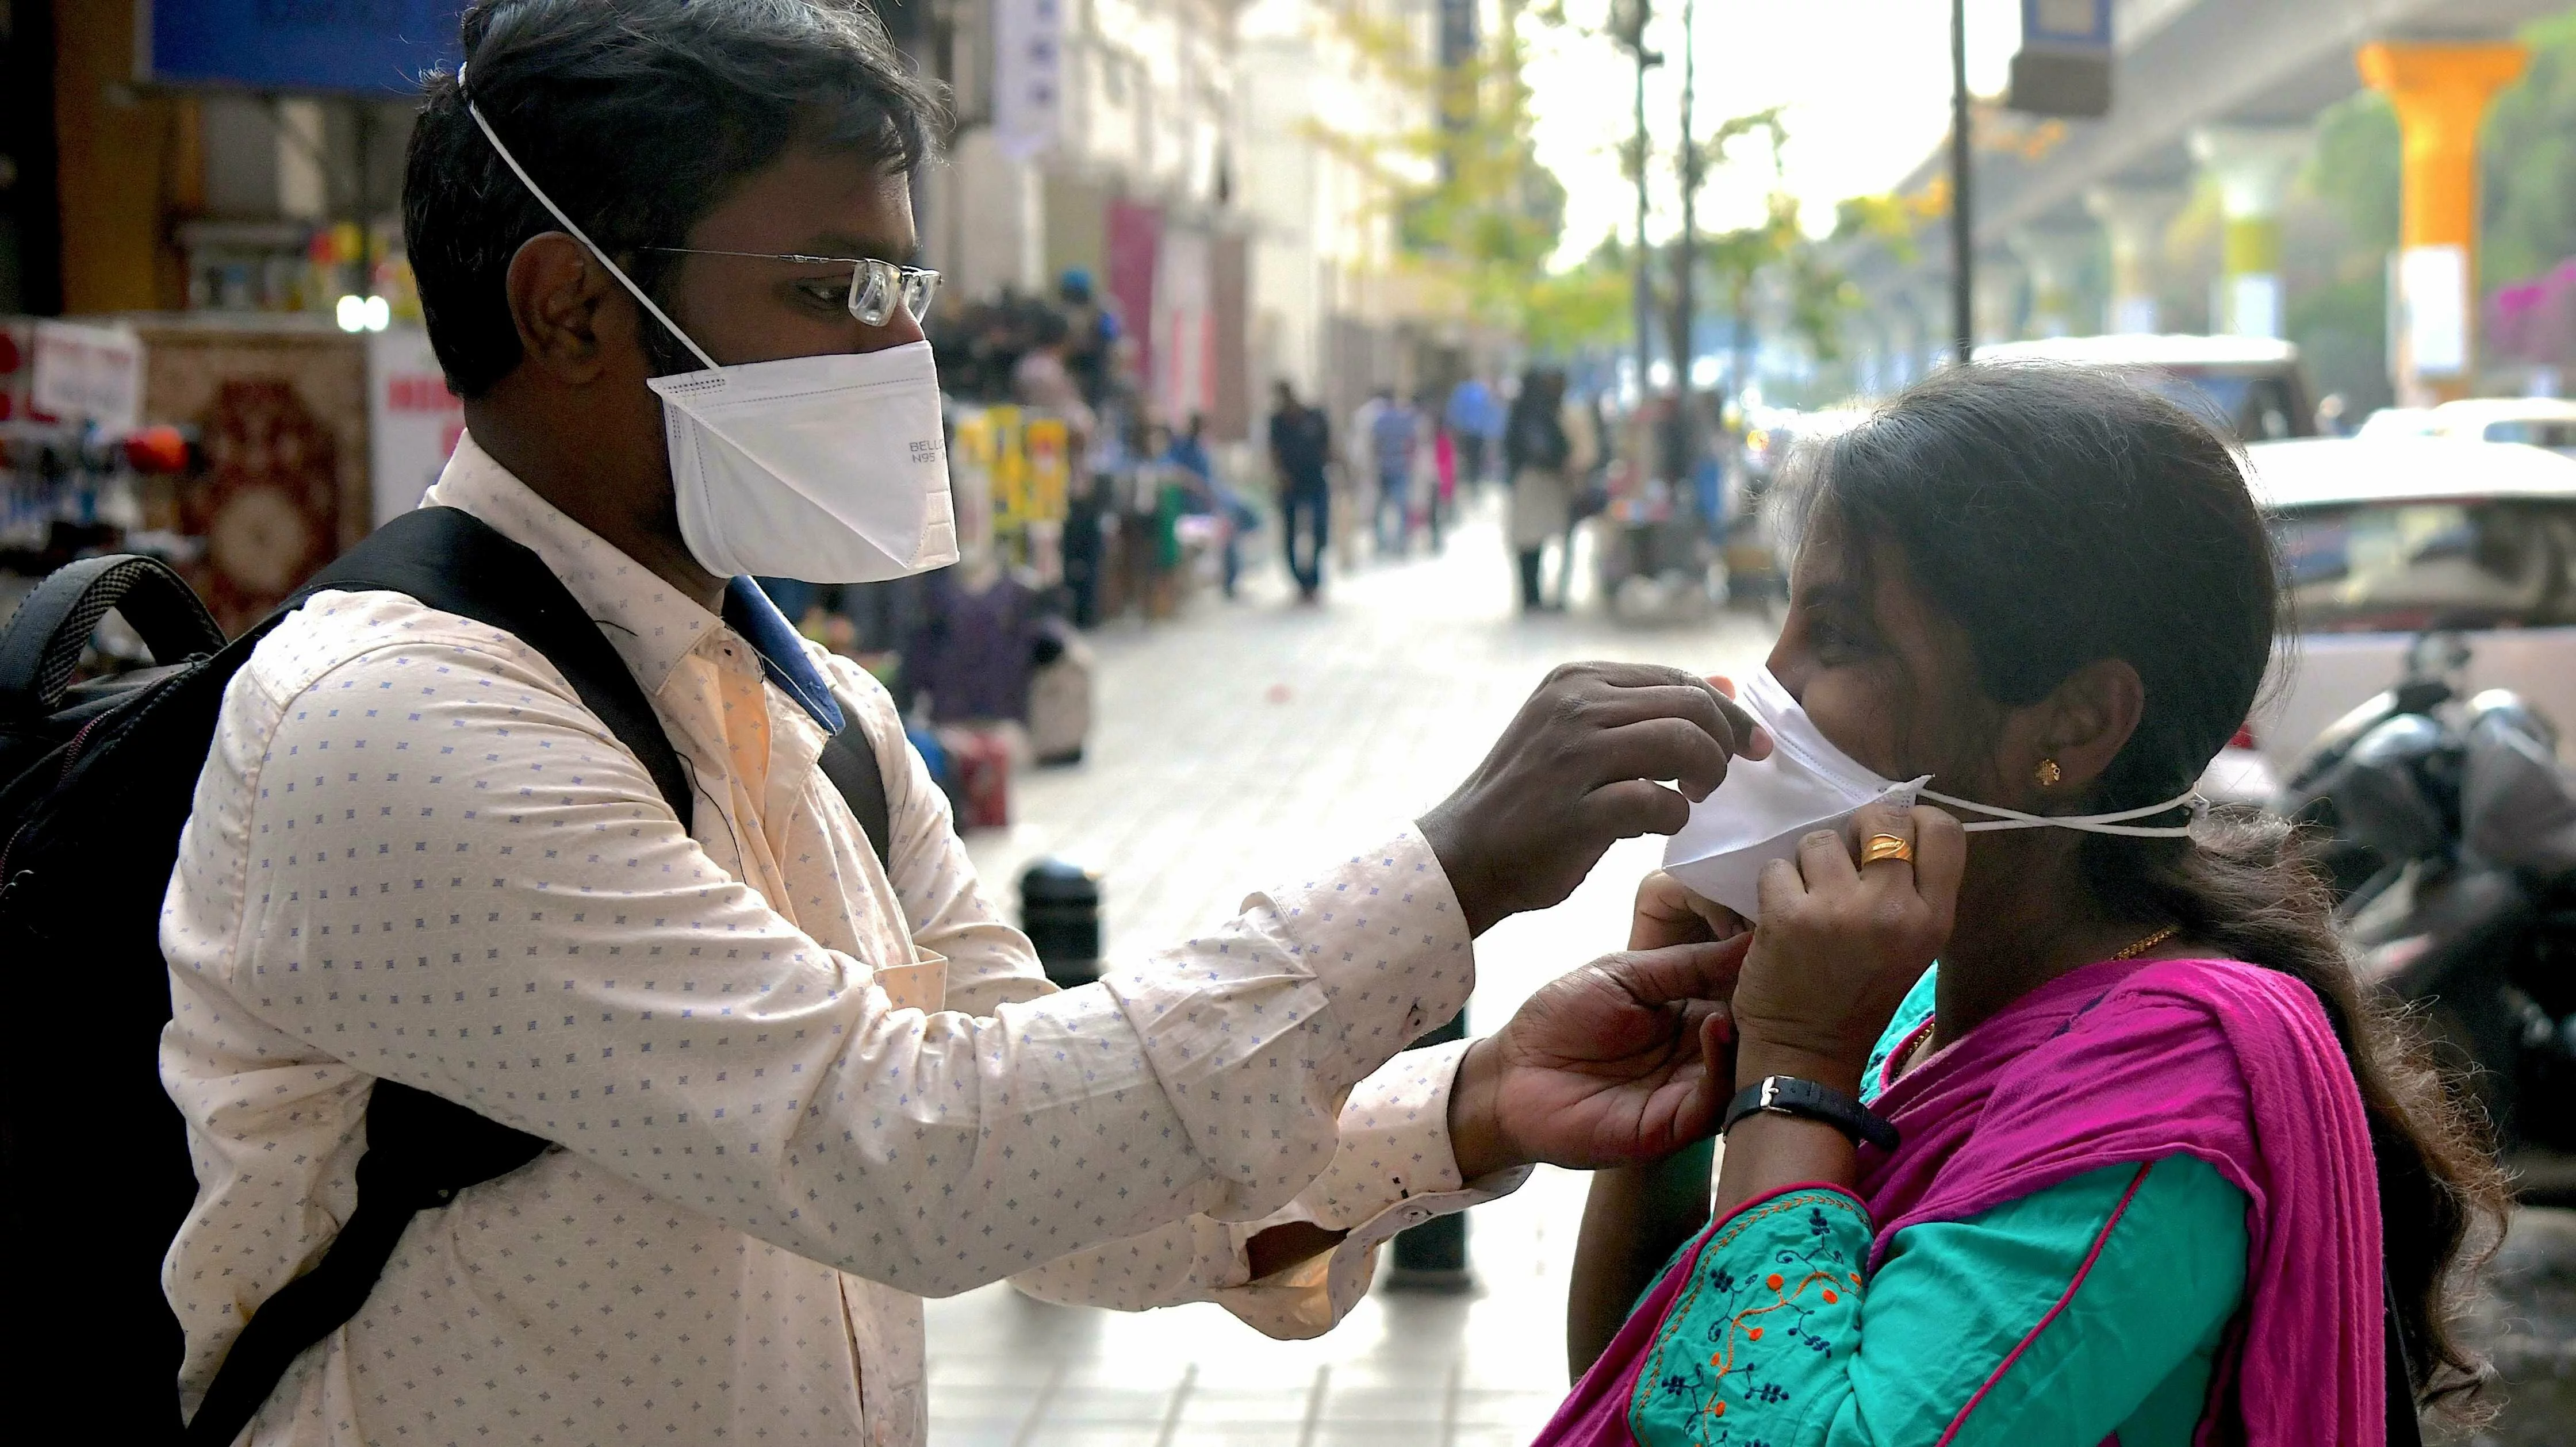 Everything You Need to Know About How to Deal With Coronavirus If You Live in India